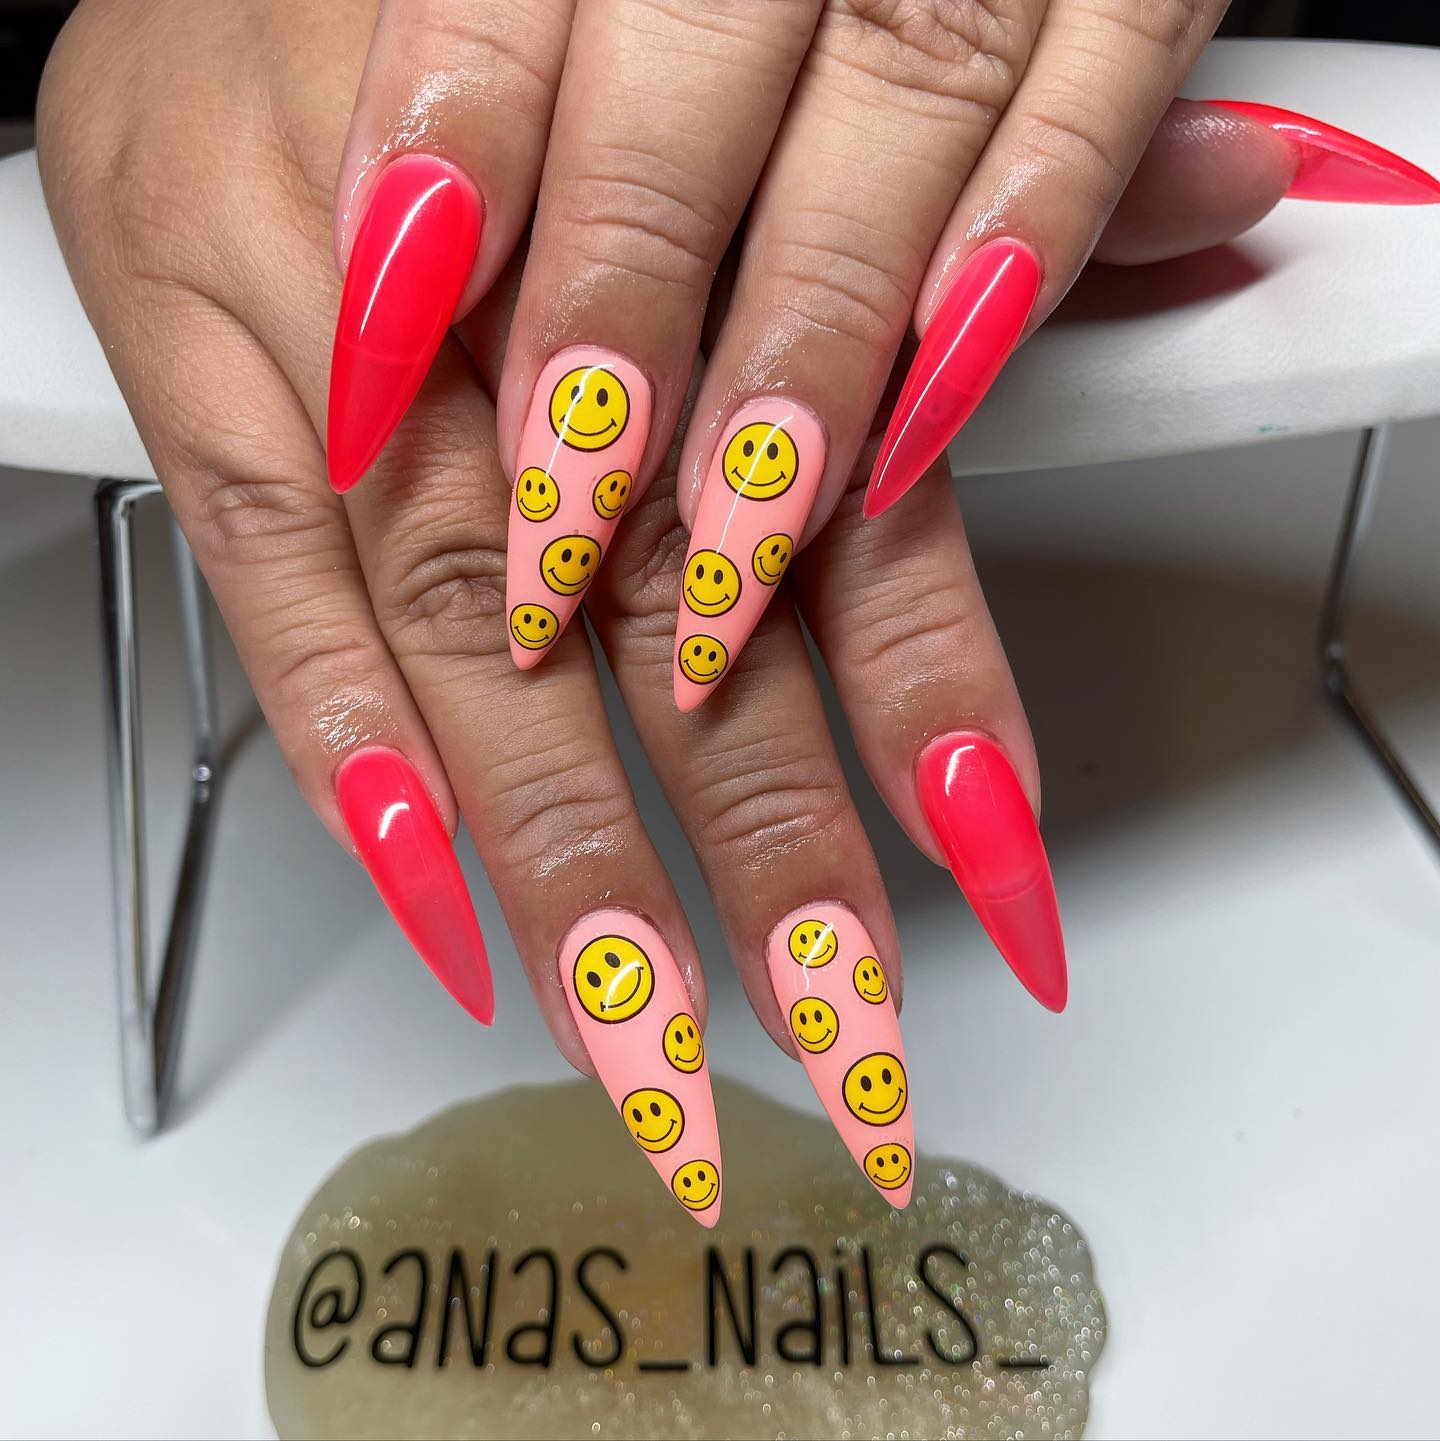 Smiley faces are so cute, so why not having them as accent nails? They will look amazing on top of your pink nails.